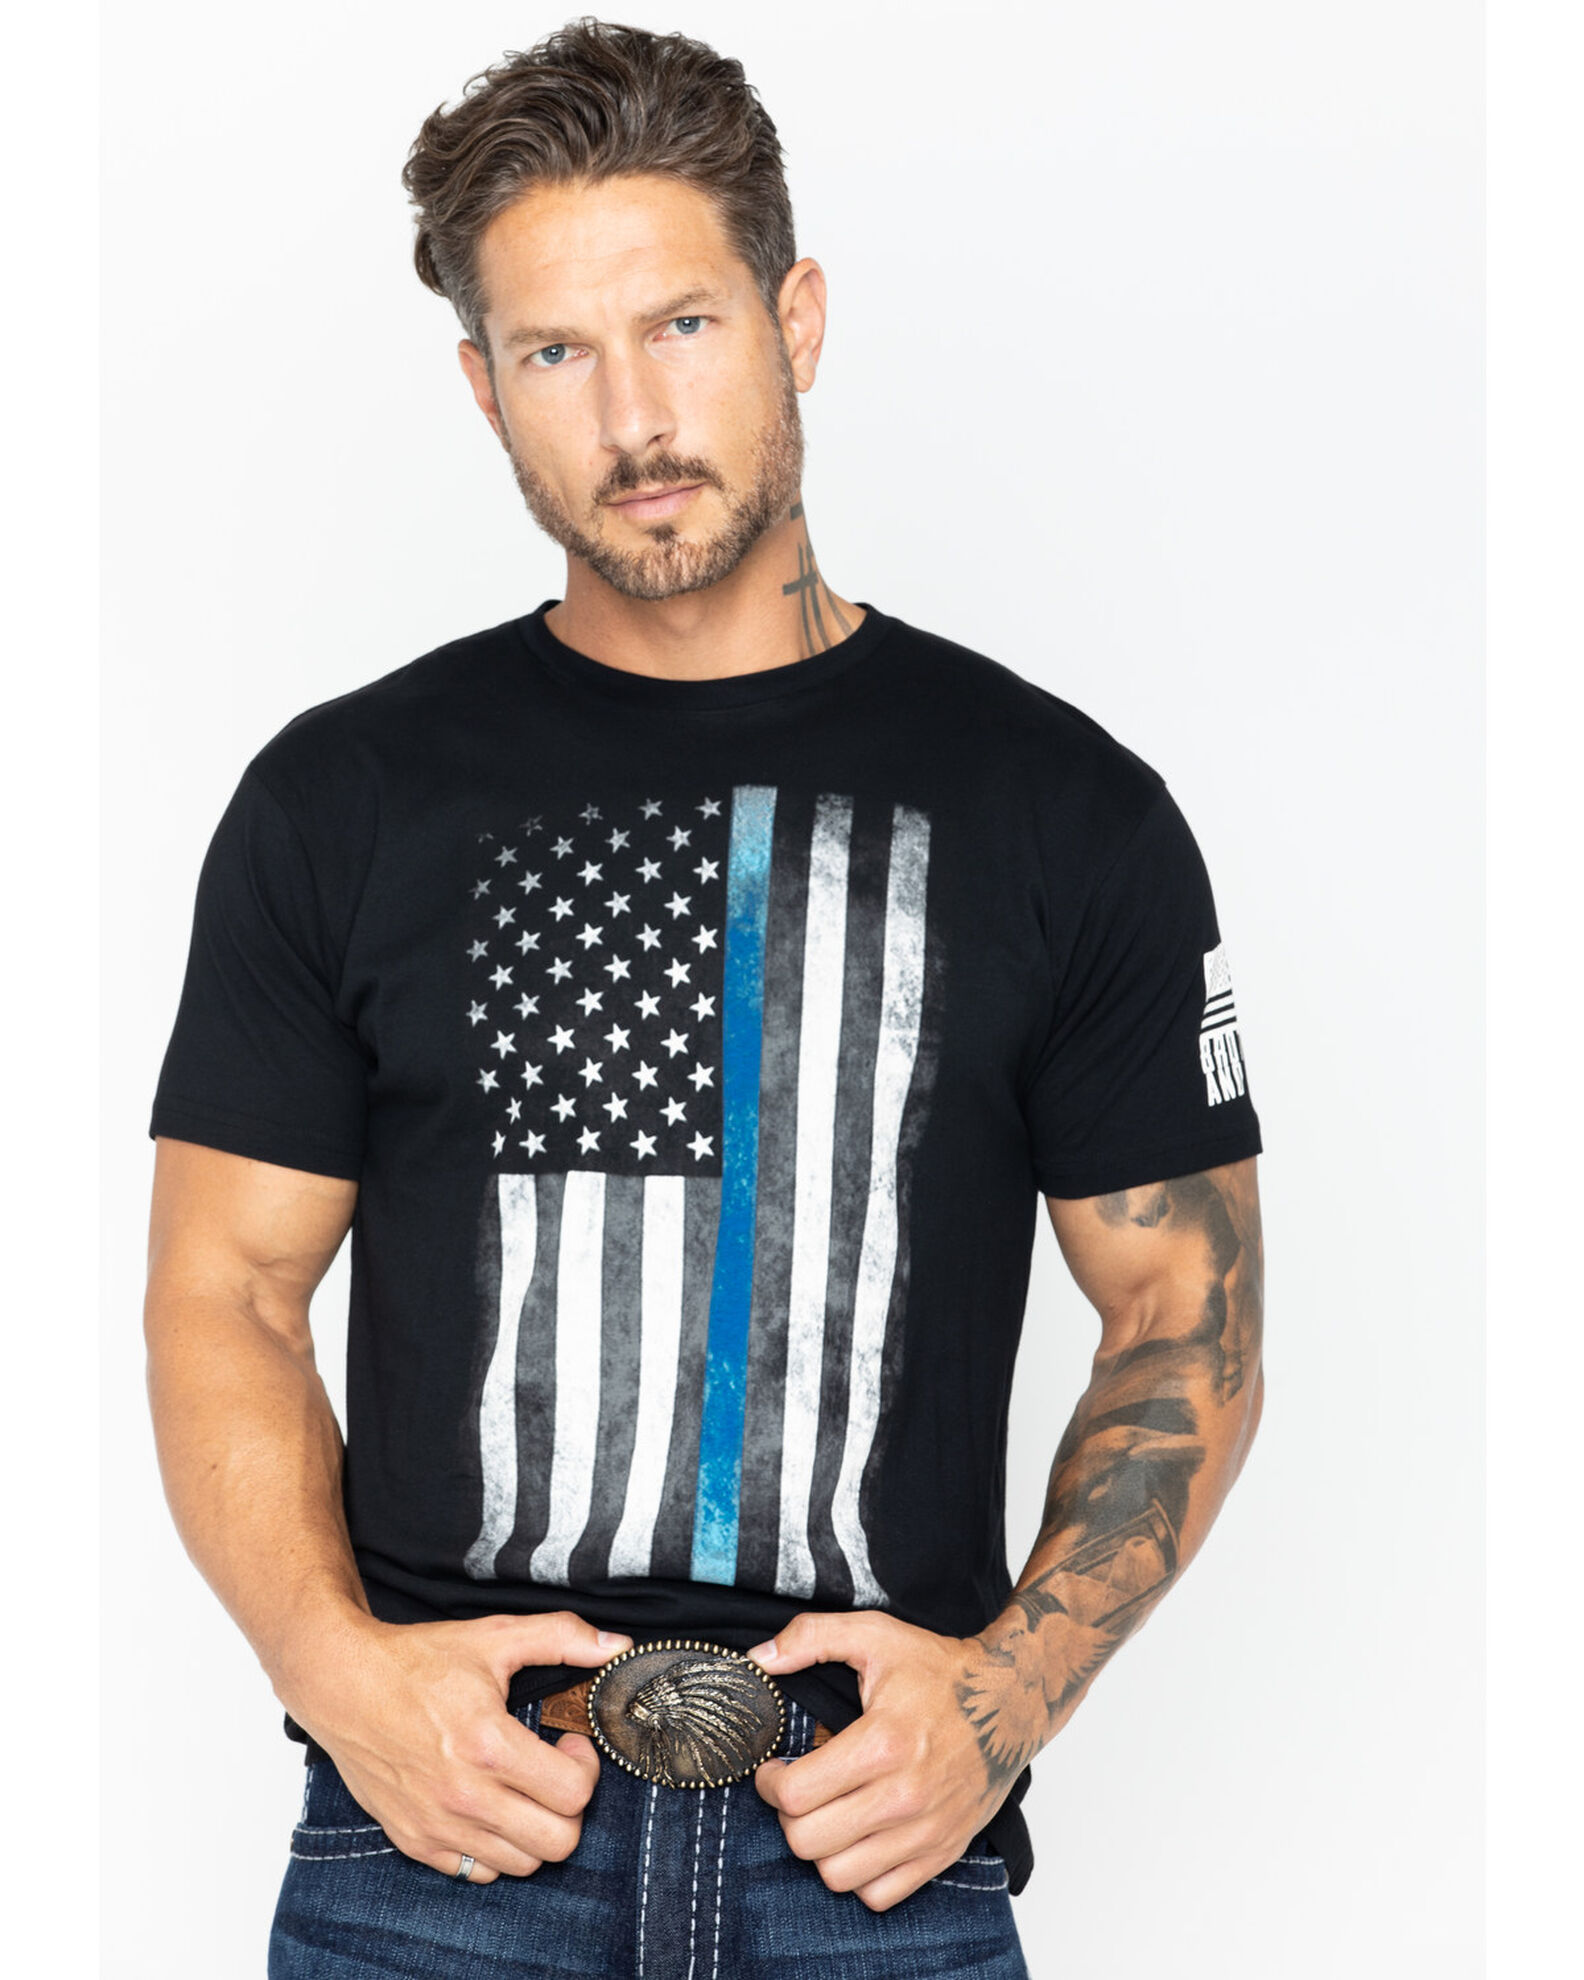 Brothers & Arms Men's Thin Blue Line Short Sleeve Graphic T-Shirt